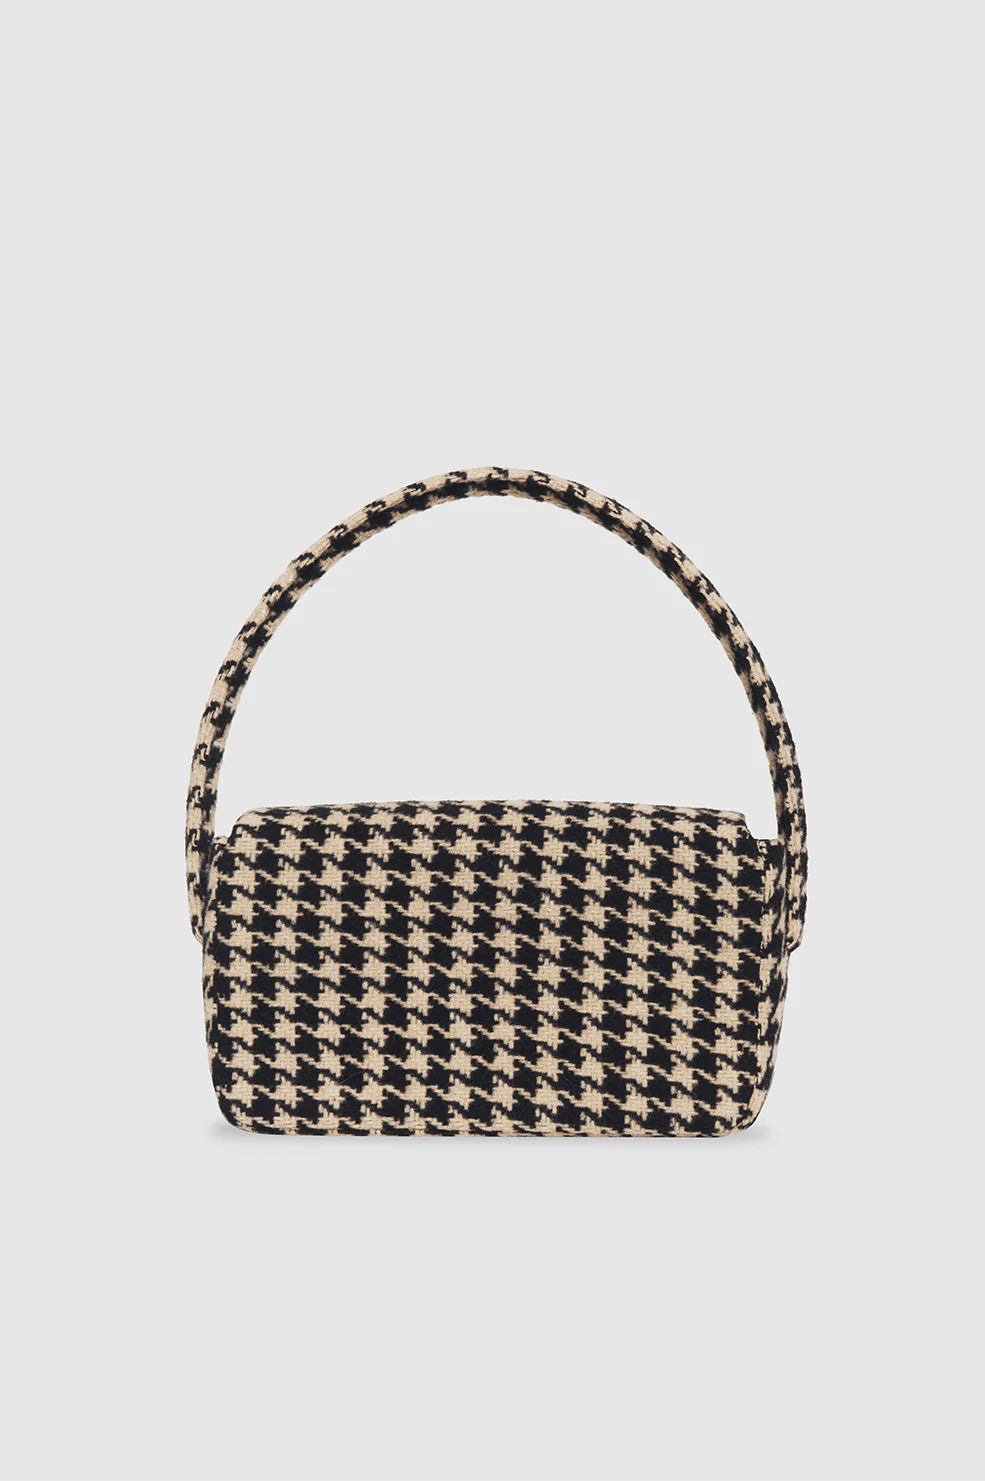 Nico Bag in Houndstooth